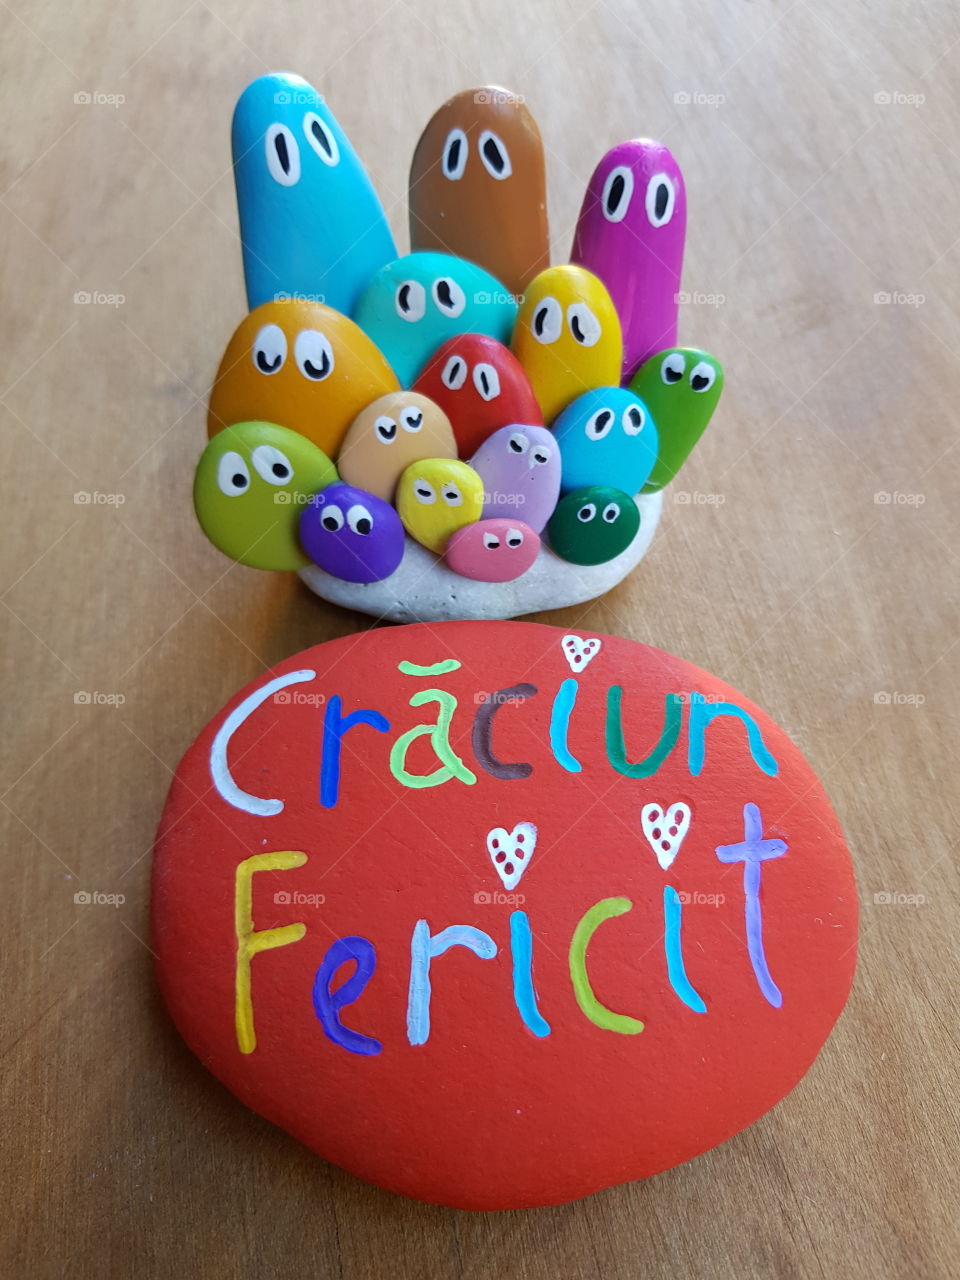 Craciun Fericit, romanian Merry Christmas with colored stones and pebbles 